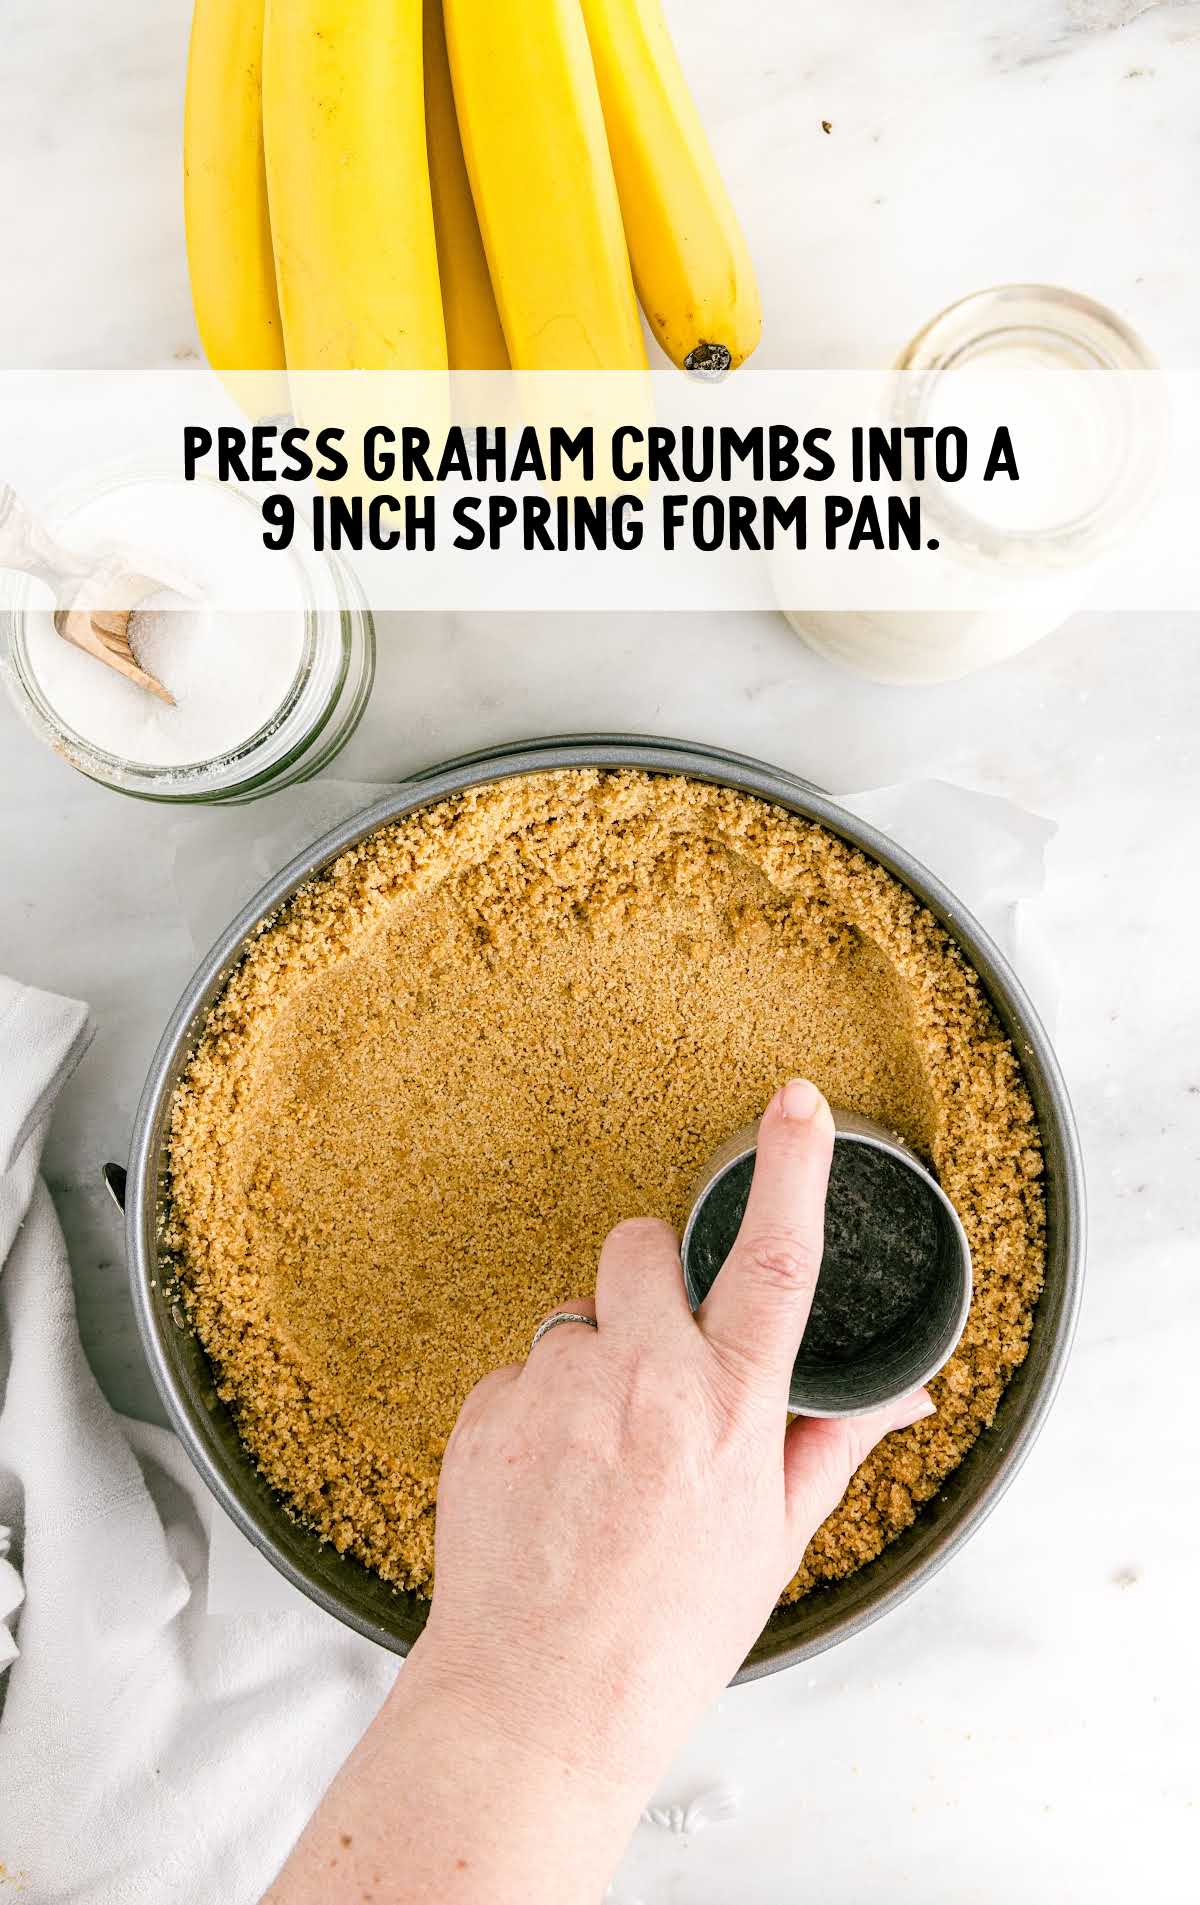 graham crumbs pressed into the spring form pan